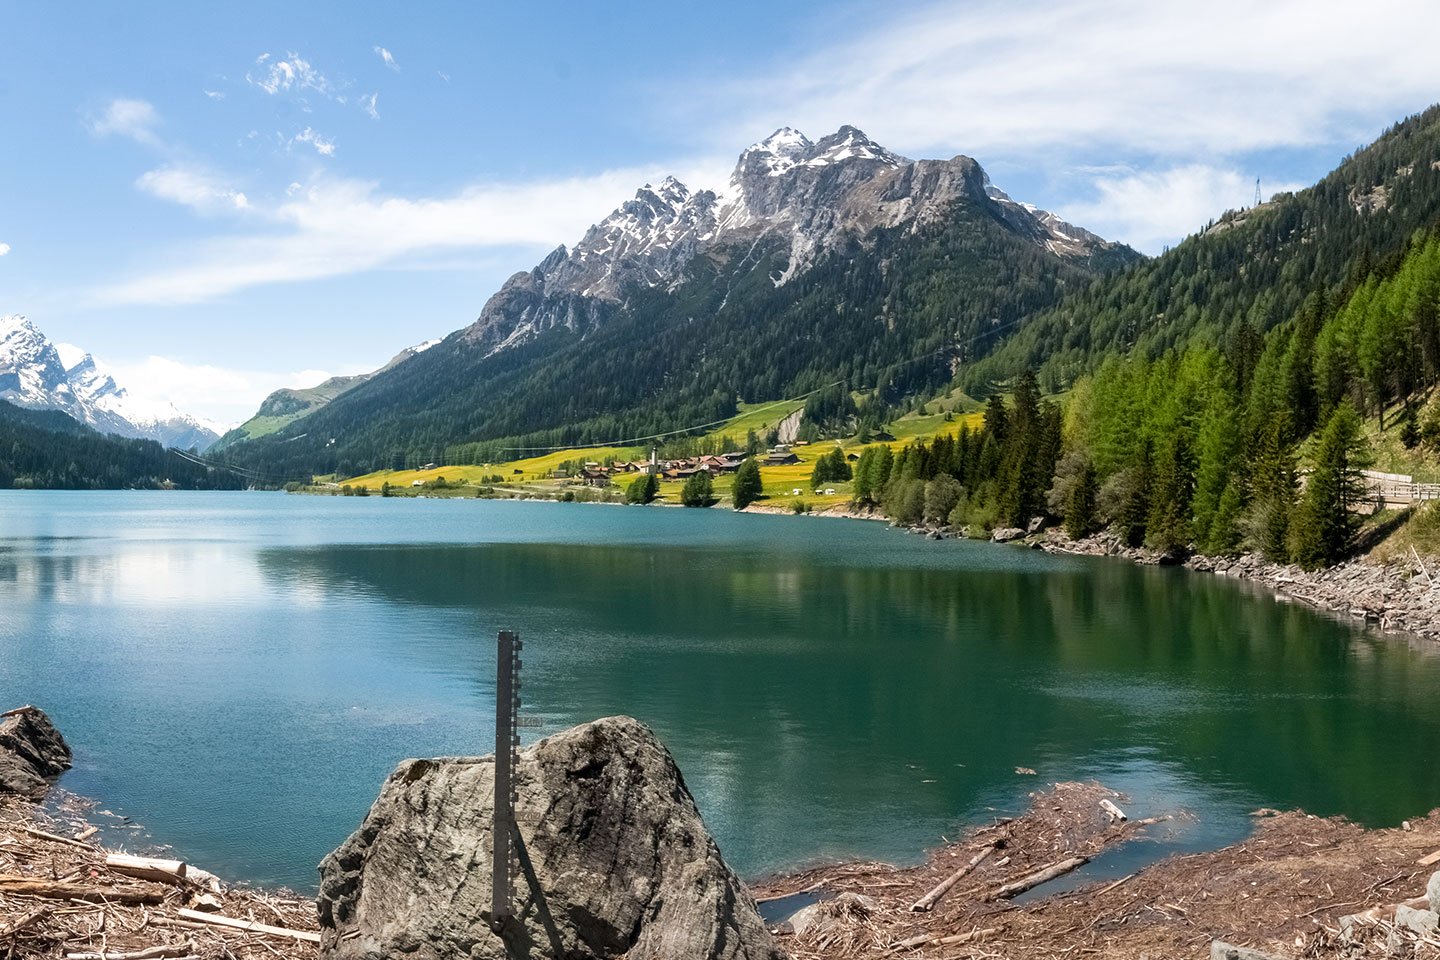 Check out our top 8 summer activities in Graubünden